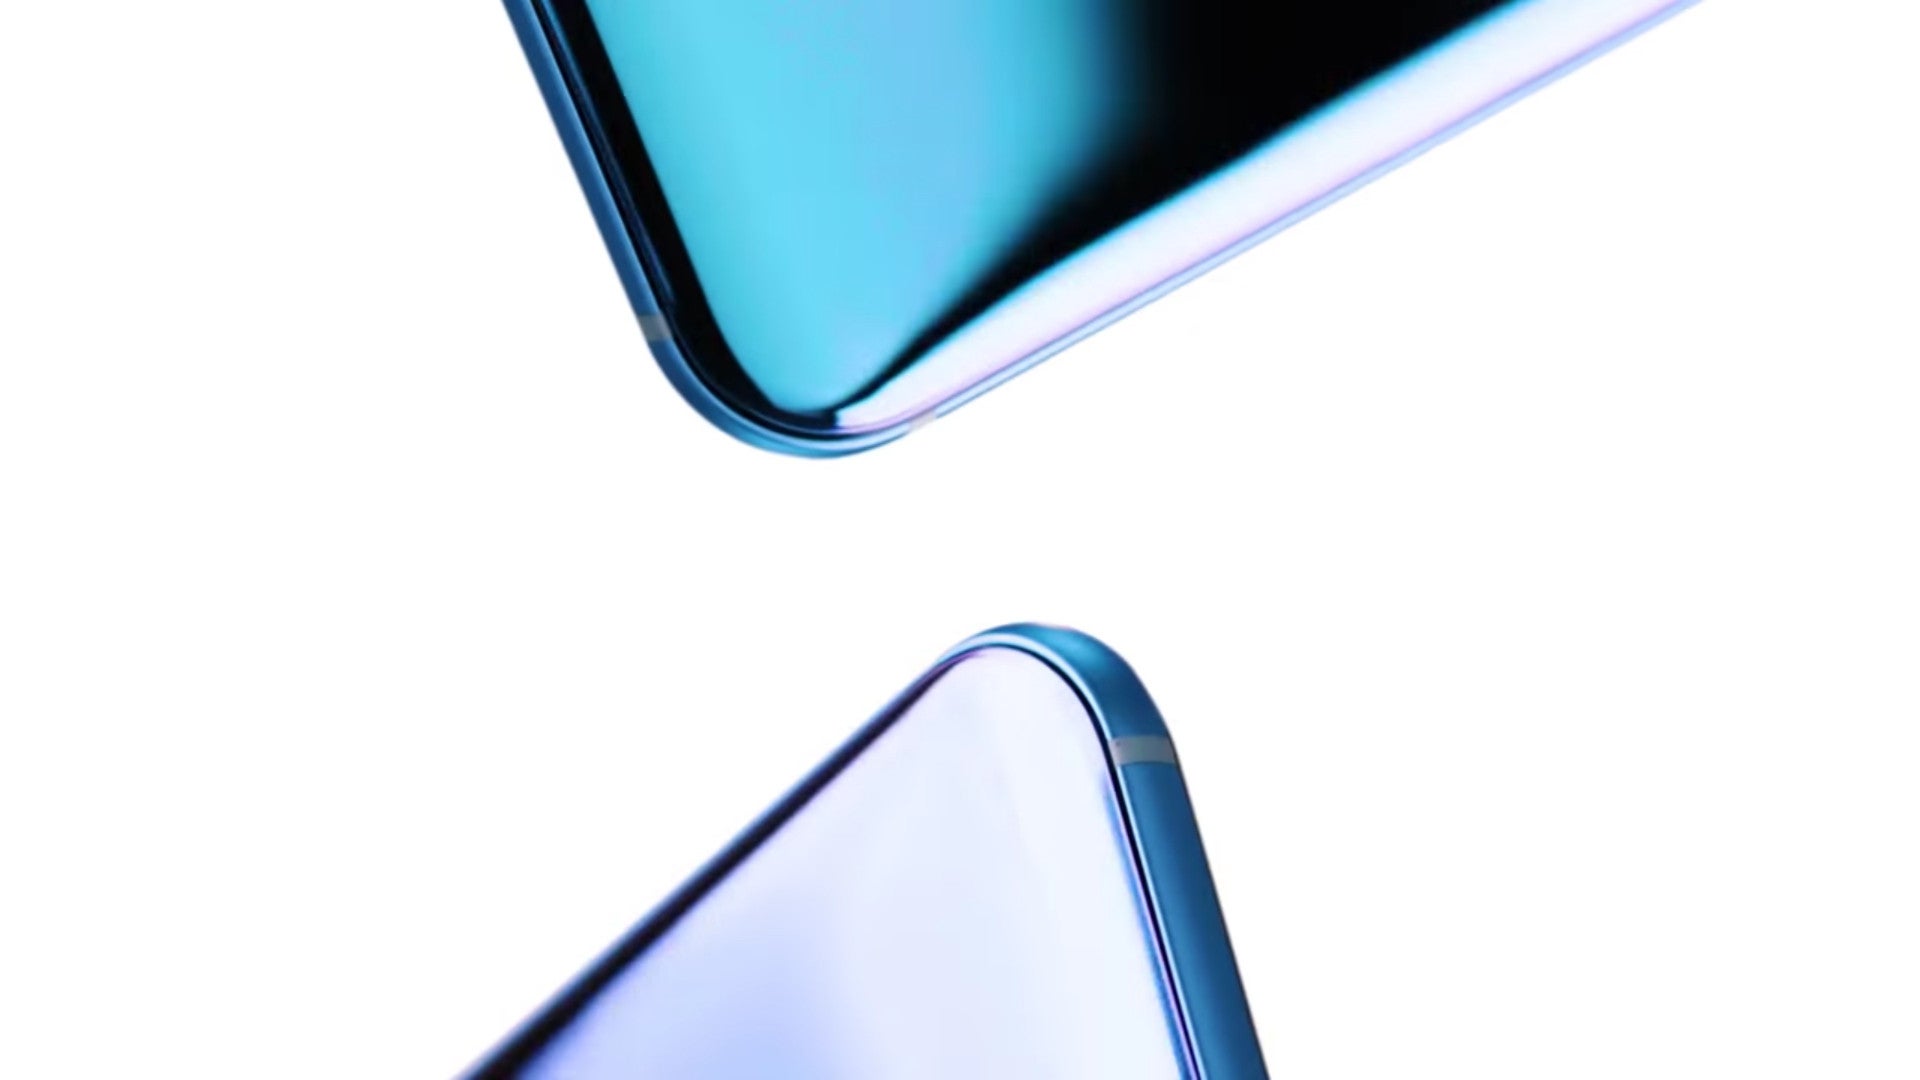 HTC U 11 video teaser released ahead of May 16 unveil